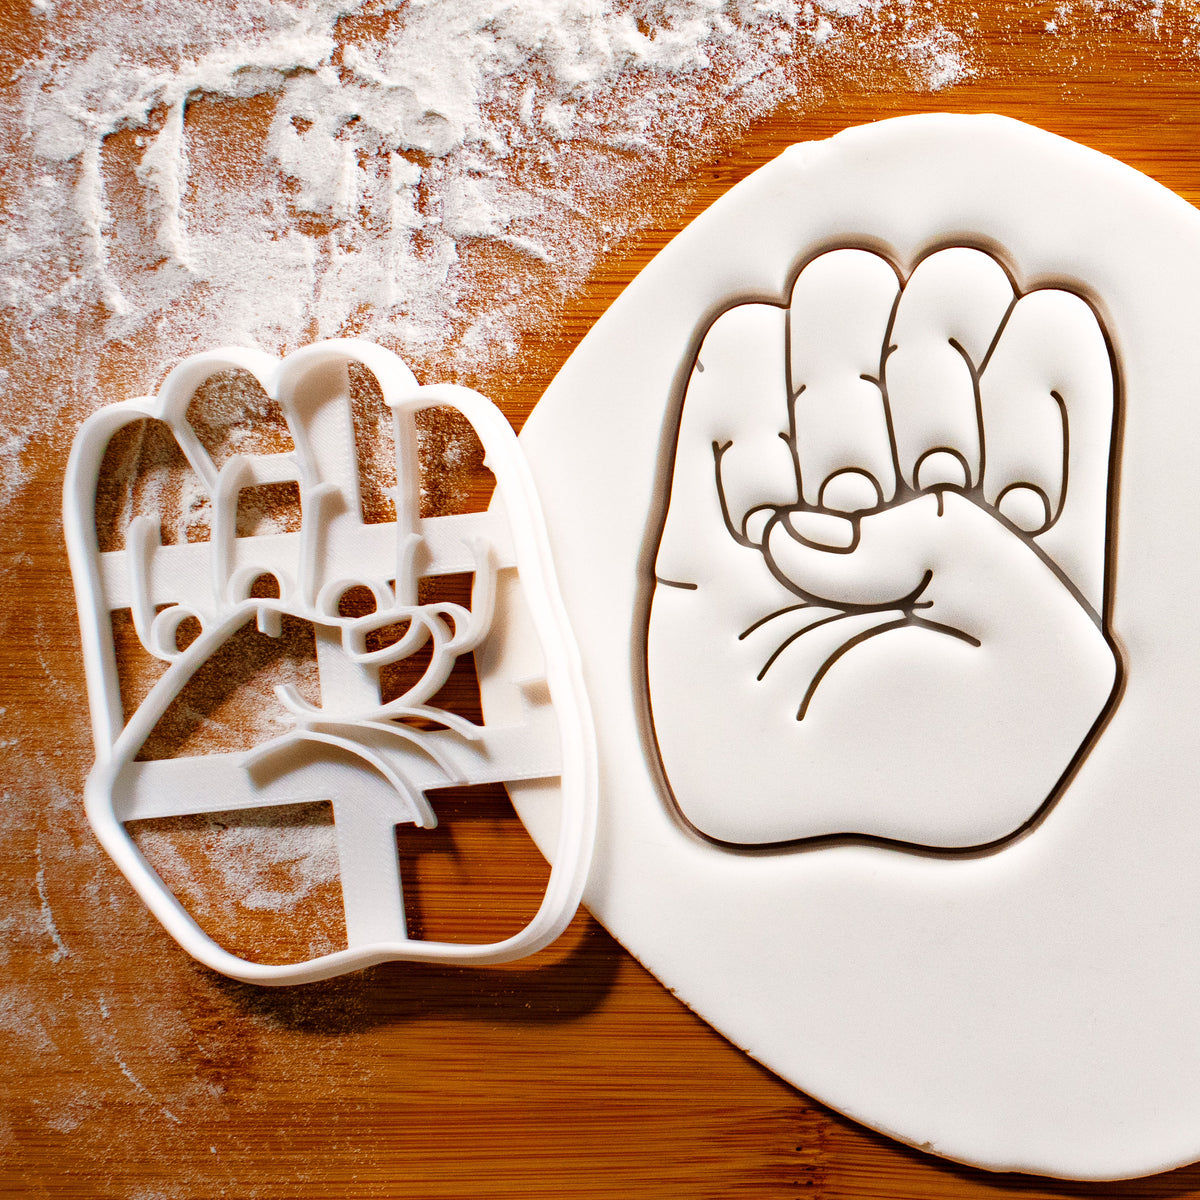 American Sign Language Letter E Cookie Cutter